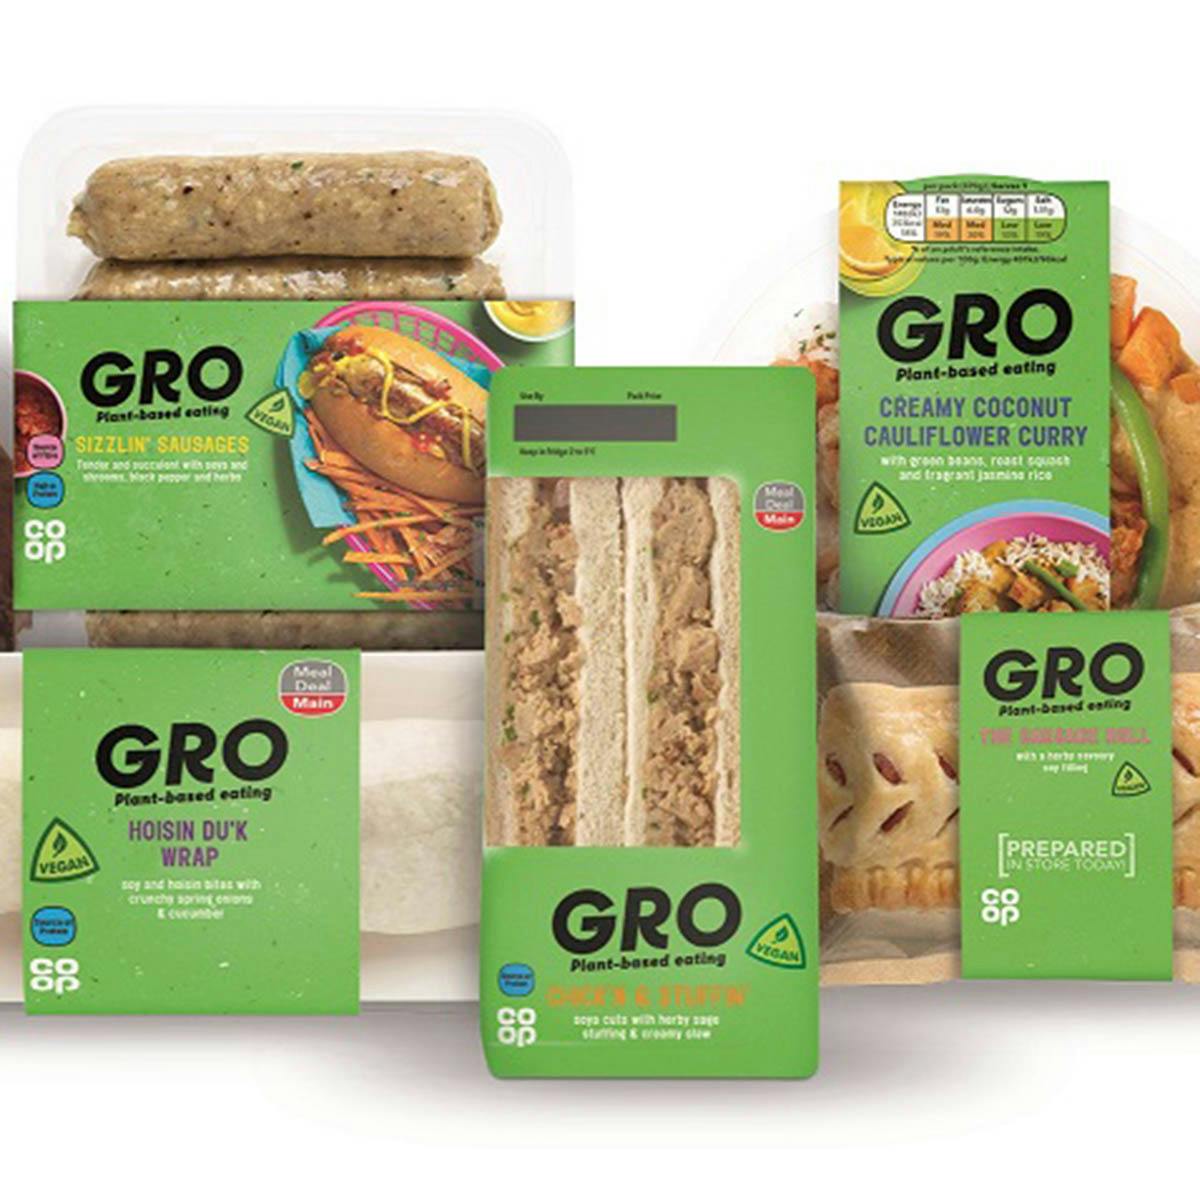 Co Op Rolls Out Meat Free Range As Brands Cash In On Veganuary